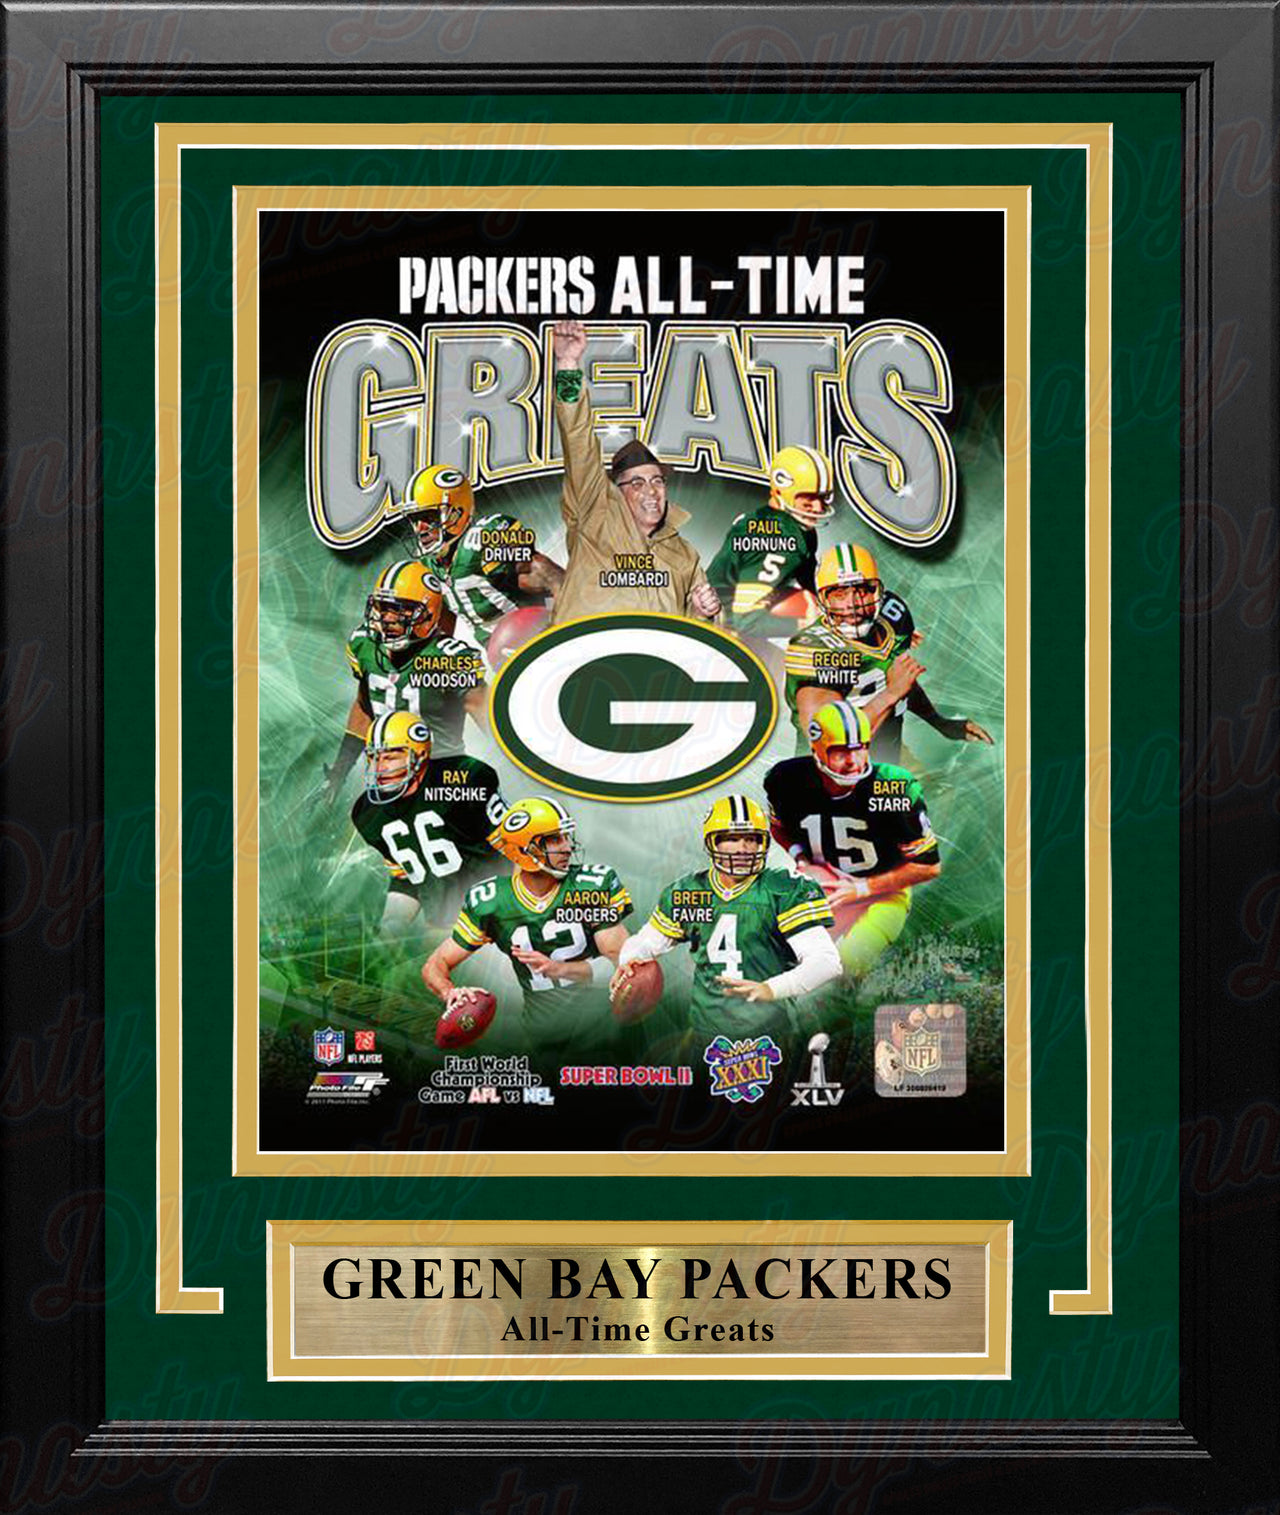 Green Bay Packers All-Time Greats NFL Football 8" x 10" Framed and Matted Photo - Dynasty Sports & Framing 